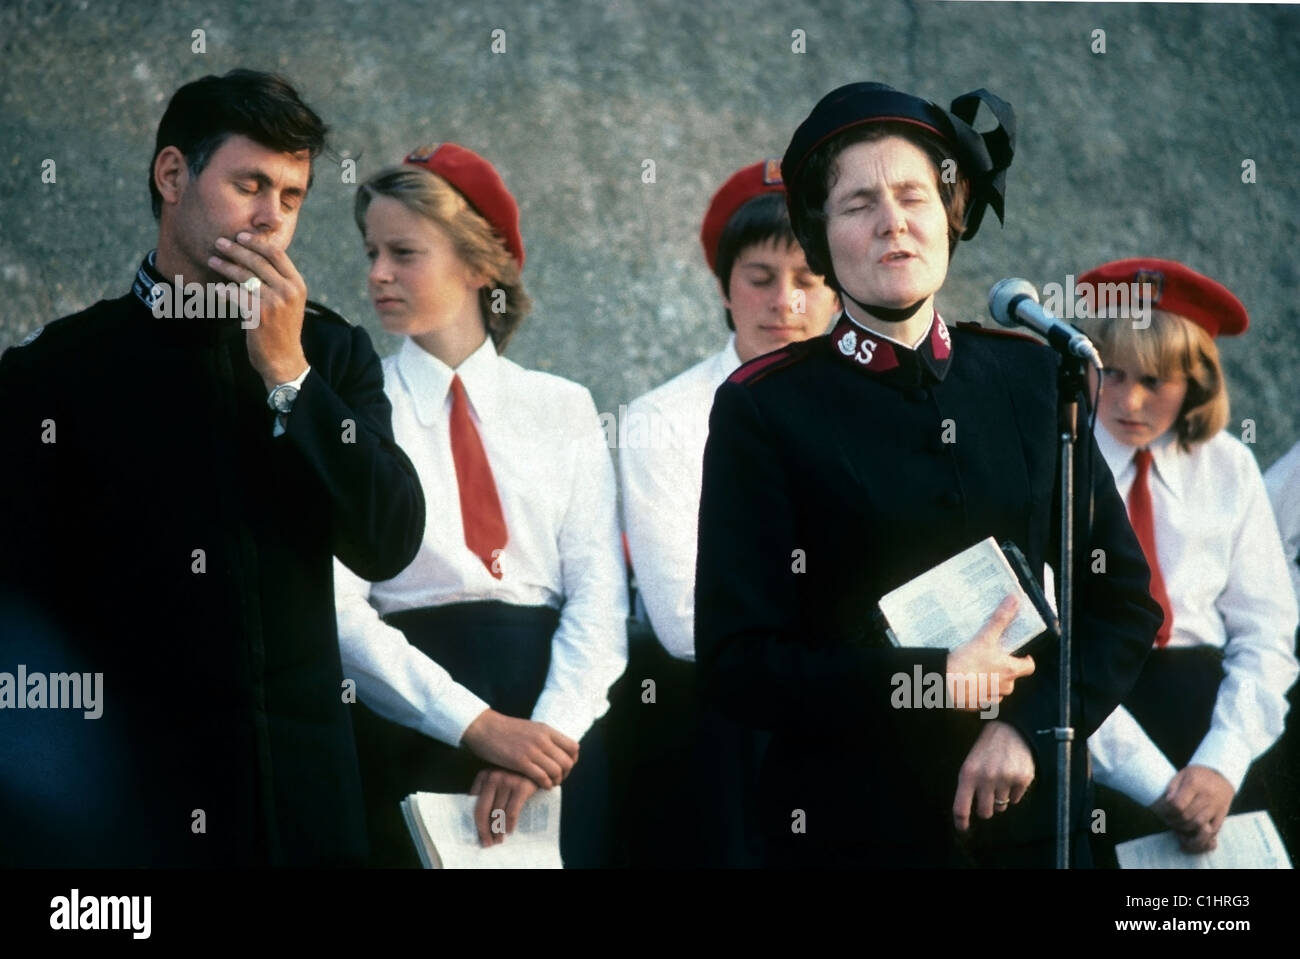 Members man and women of the Salvation Army band in uniform praying and speaking on the streets in Norfolk England UK 1970s 1973  70s seventies   KATHY DEWITT Stock Photo